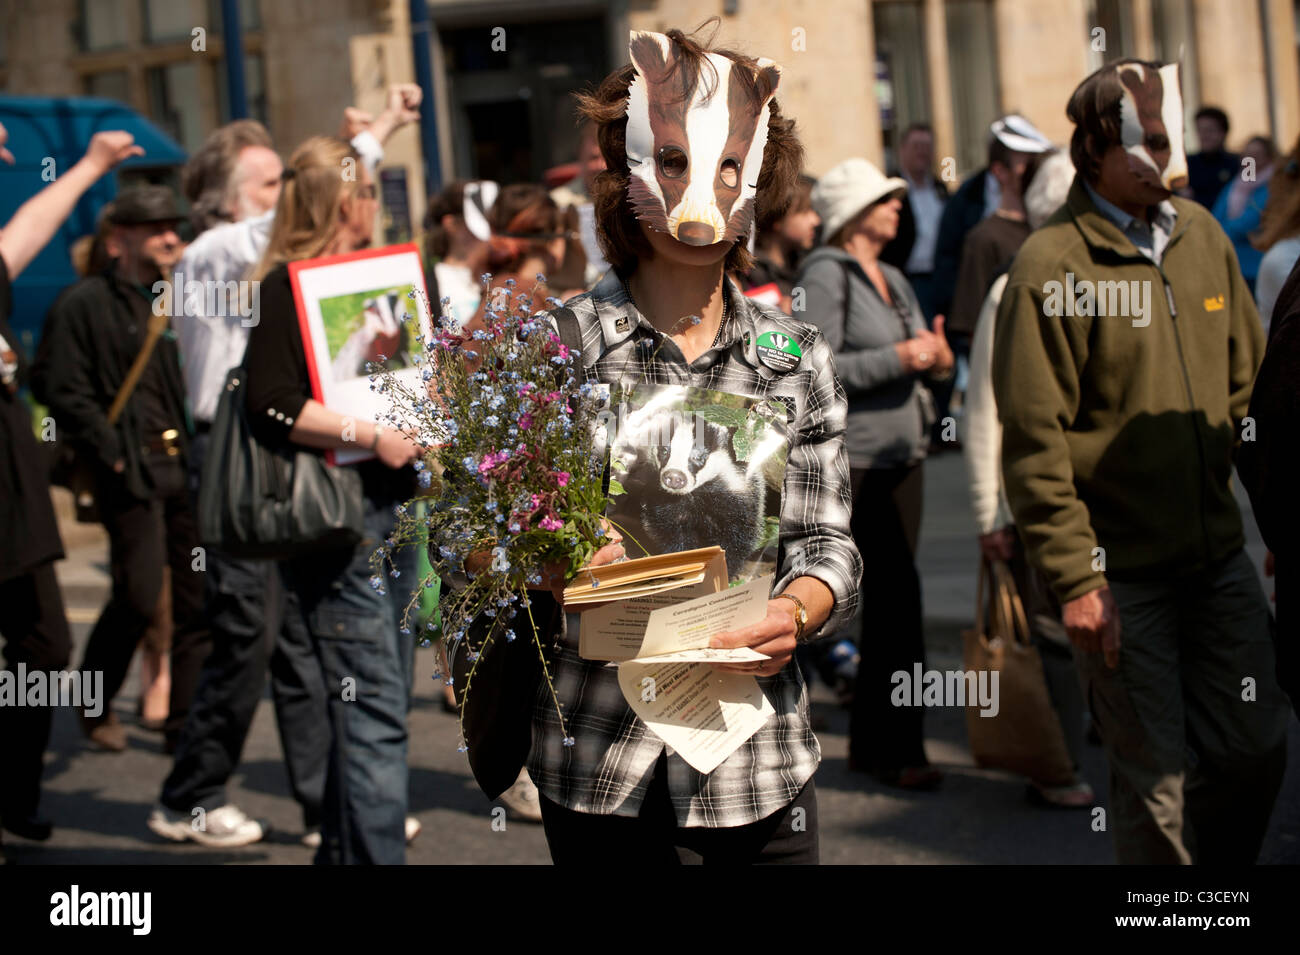 Demonstrators protesting about the plans to cull badgers in wales as a means of controlling bovine TB, Aberystwyth Wales UK Stock Photo